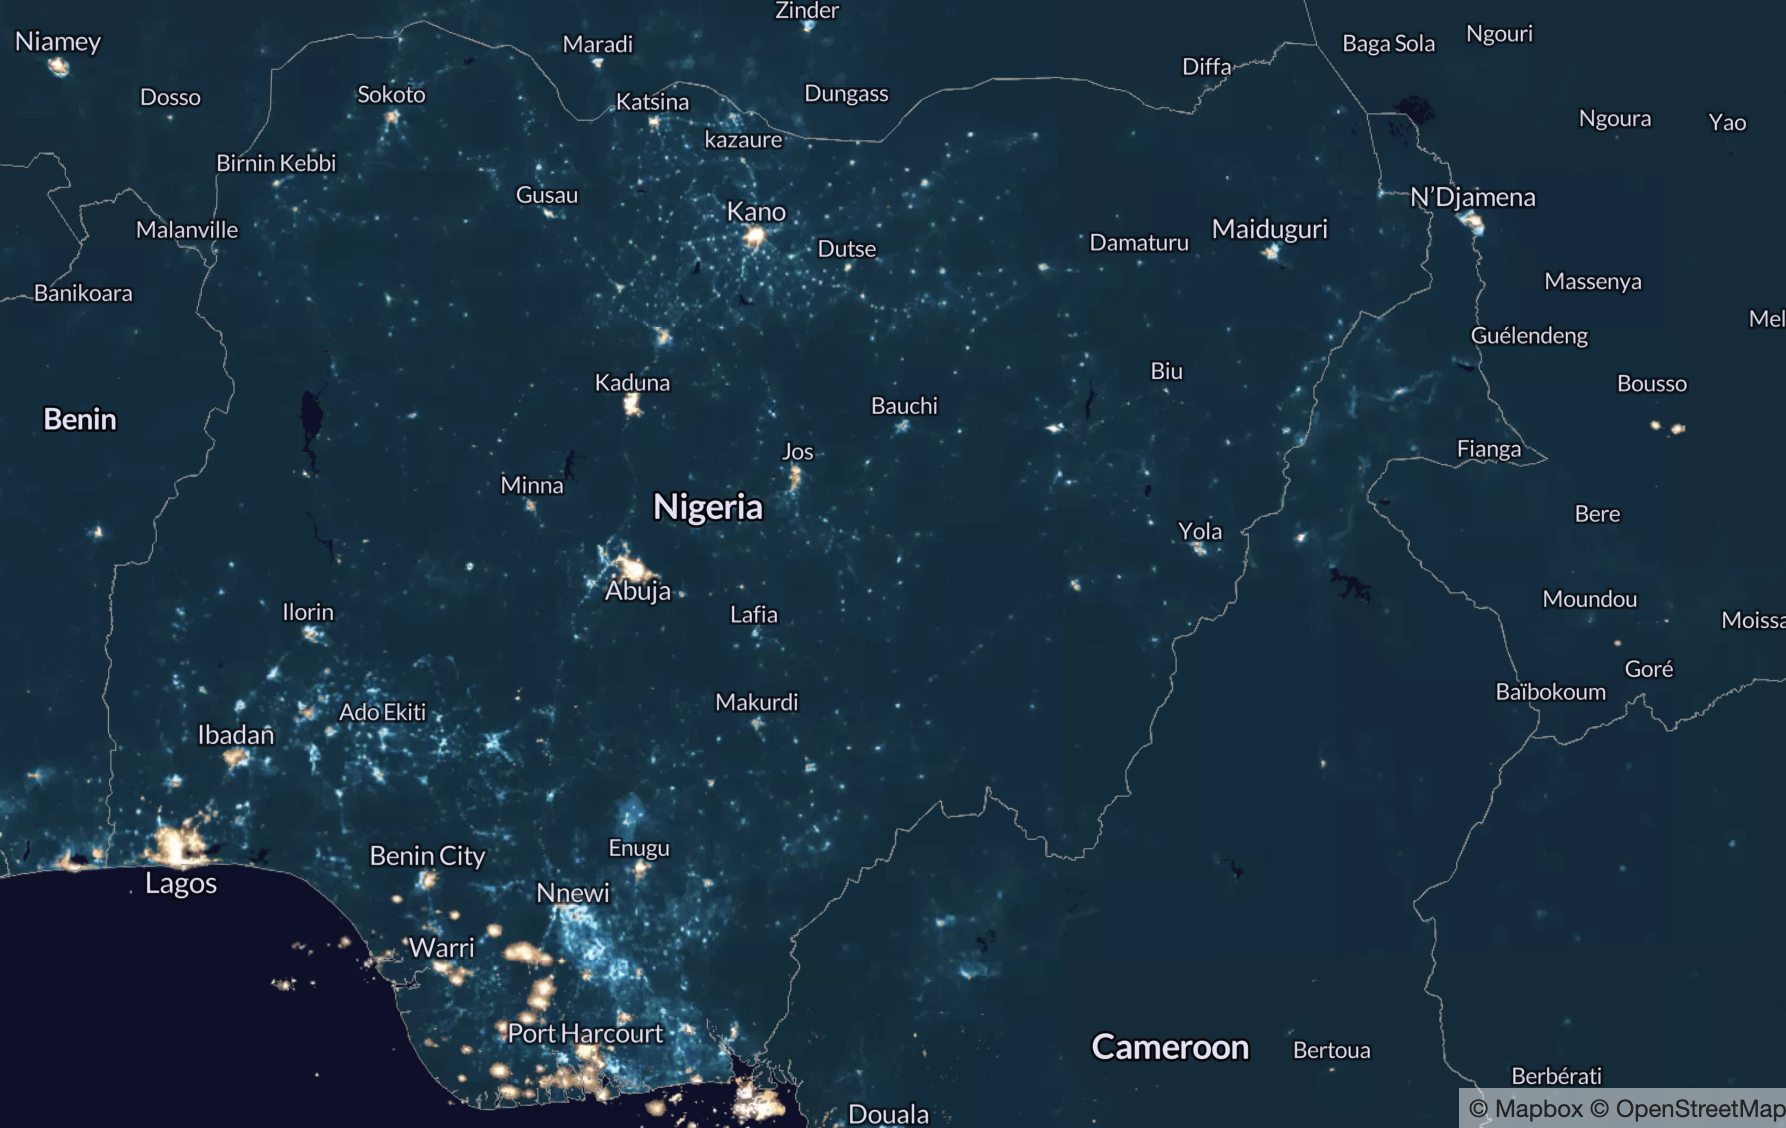 Illustration of nighttime lights in Nigeria, published by the World Bank